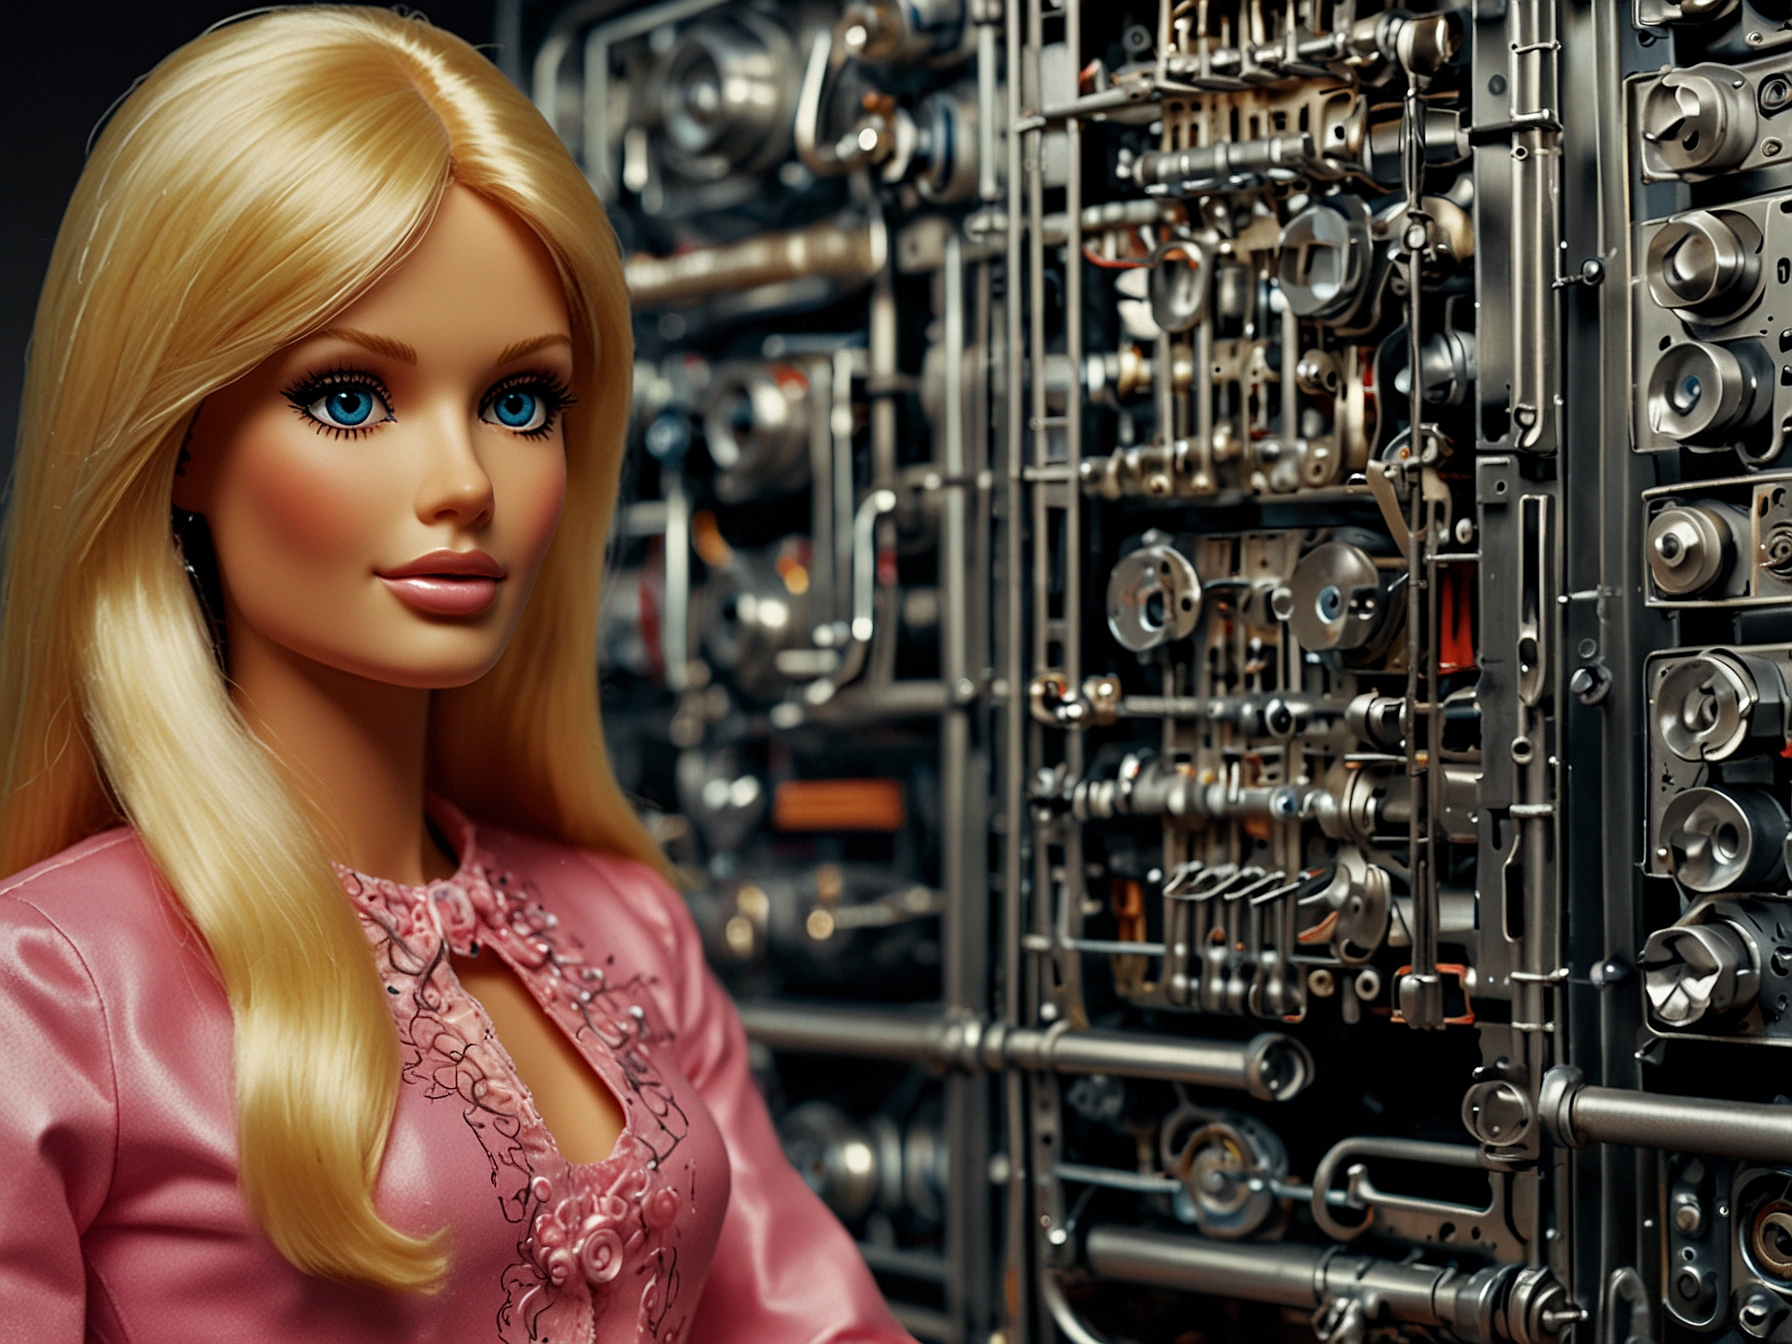 Close-up of the 'talking Barbie' from 1968 with its mechanical insides exposed, illustrating the ingenuity and complexity behind the toy's design and production process.